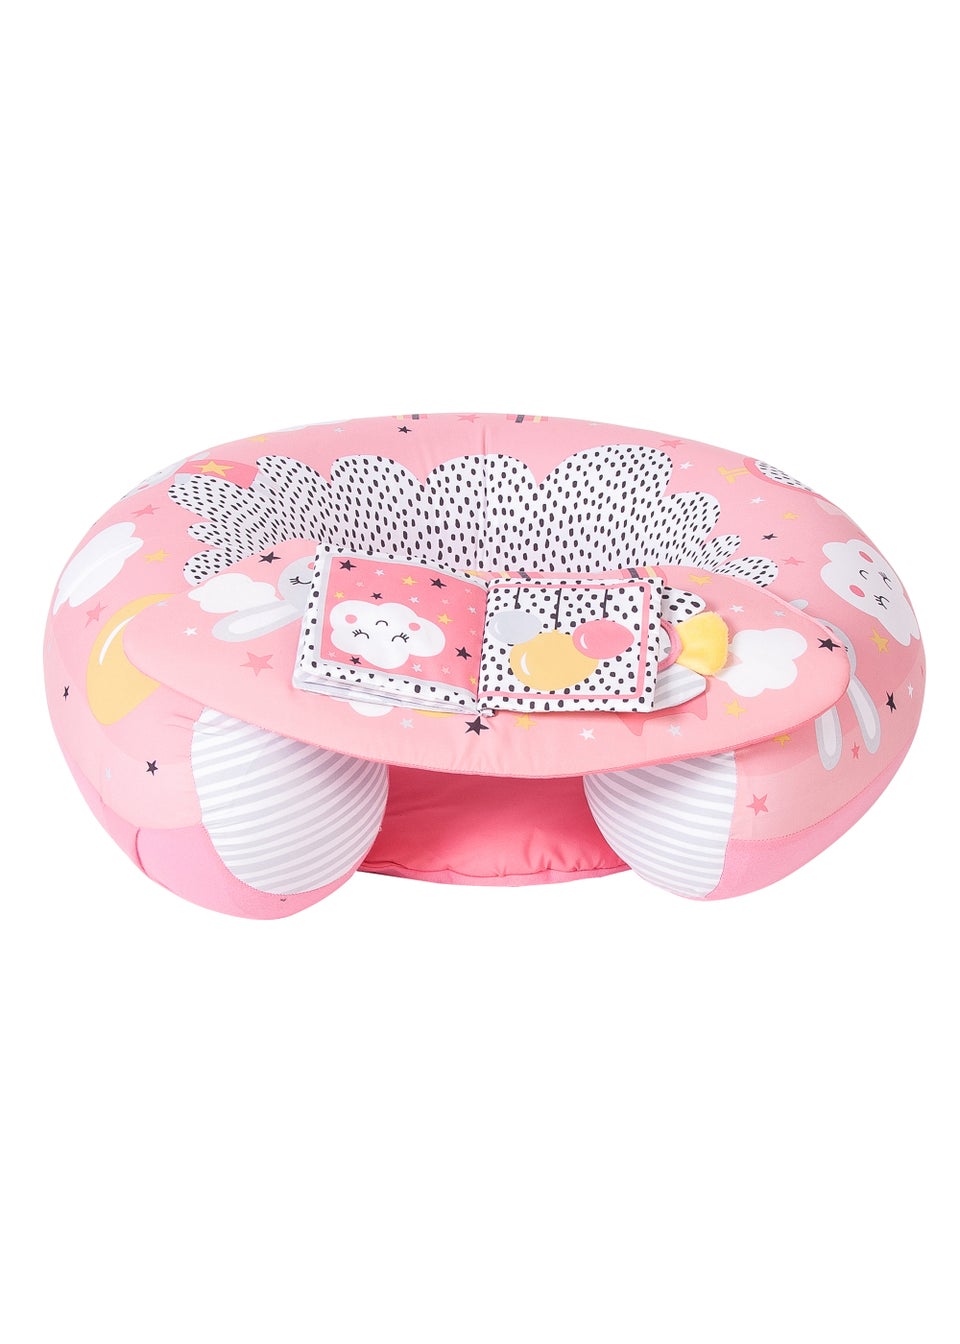 Red Kite Dreamy Meadow Sit Me Up Inflatable Ring Seat (21.5cm x 44.5cm x 8.5cm)